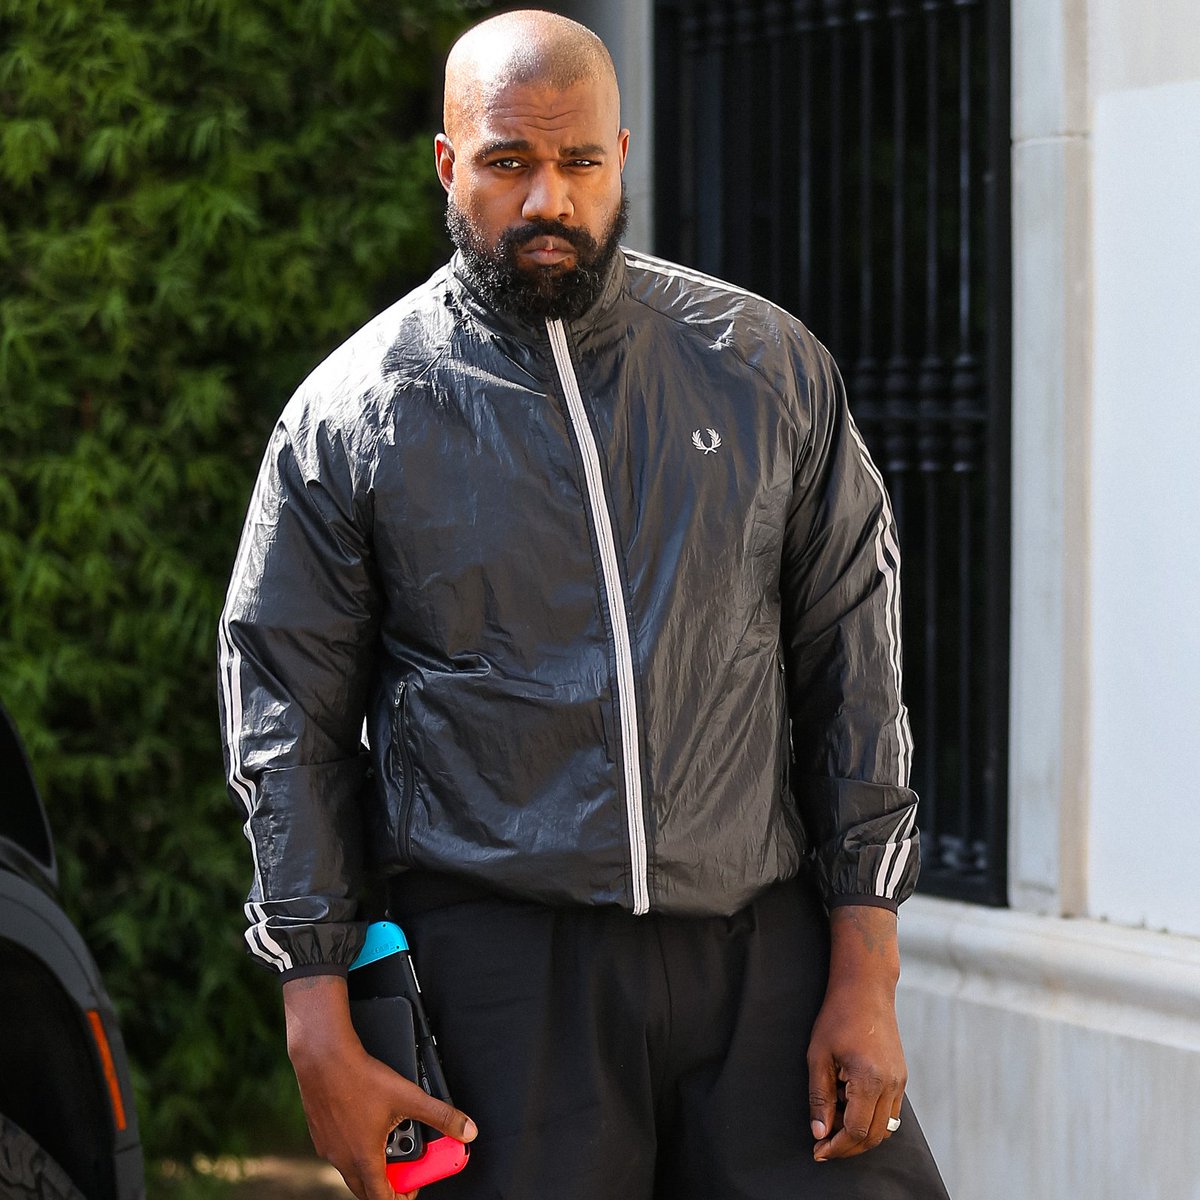 Ye sued for allegedly discriminating against Black staff, demanding employee to cut off his locs. “Specifically, Kanye frequently screamed at and berated Black employees, while in contrast, he never so much as raised his tone of voice toward white staff.”